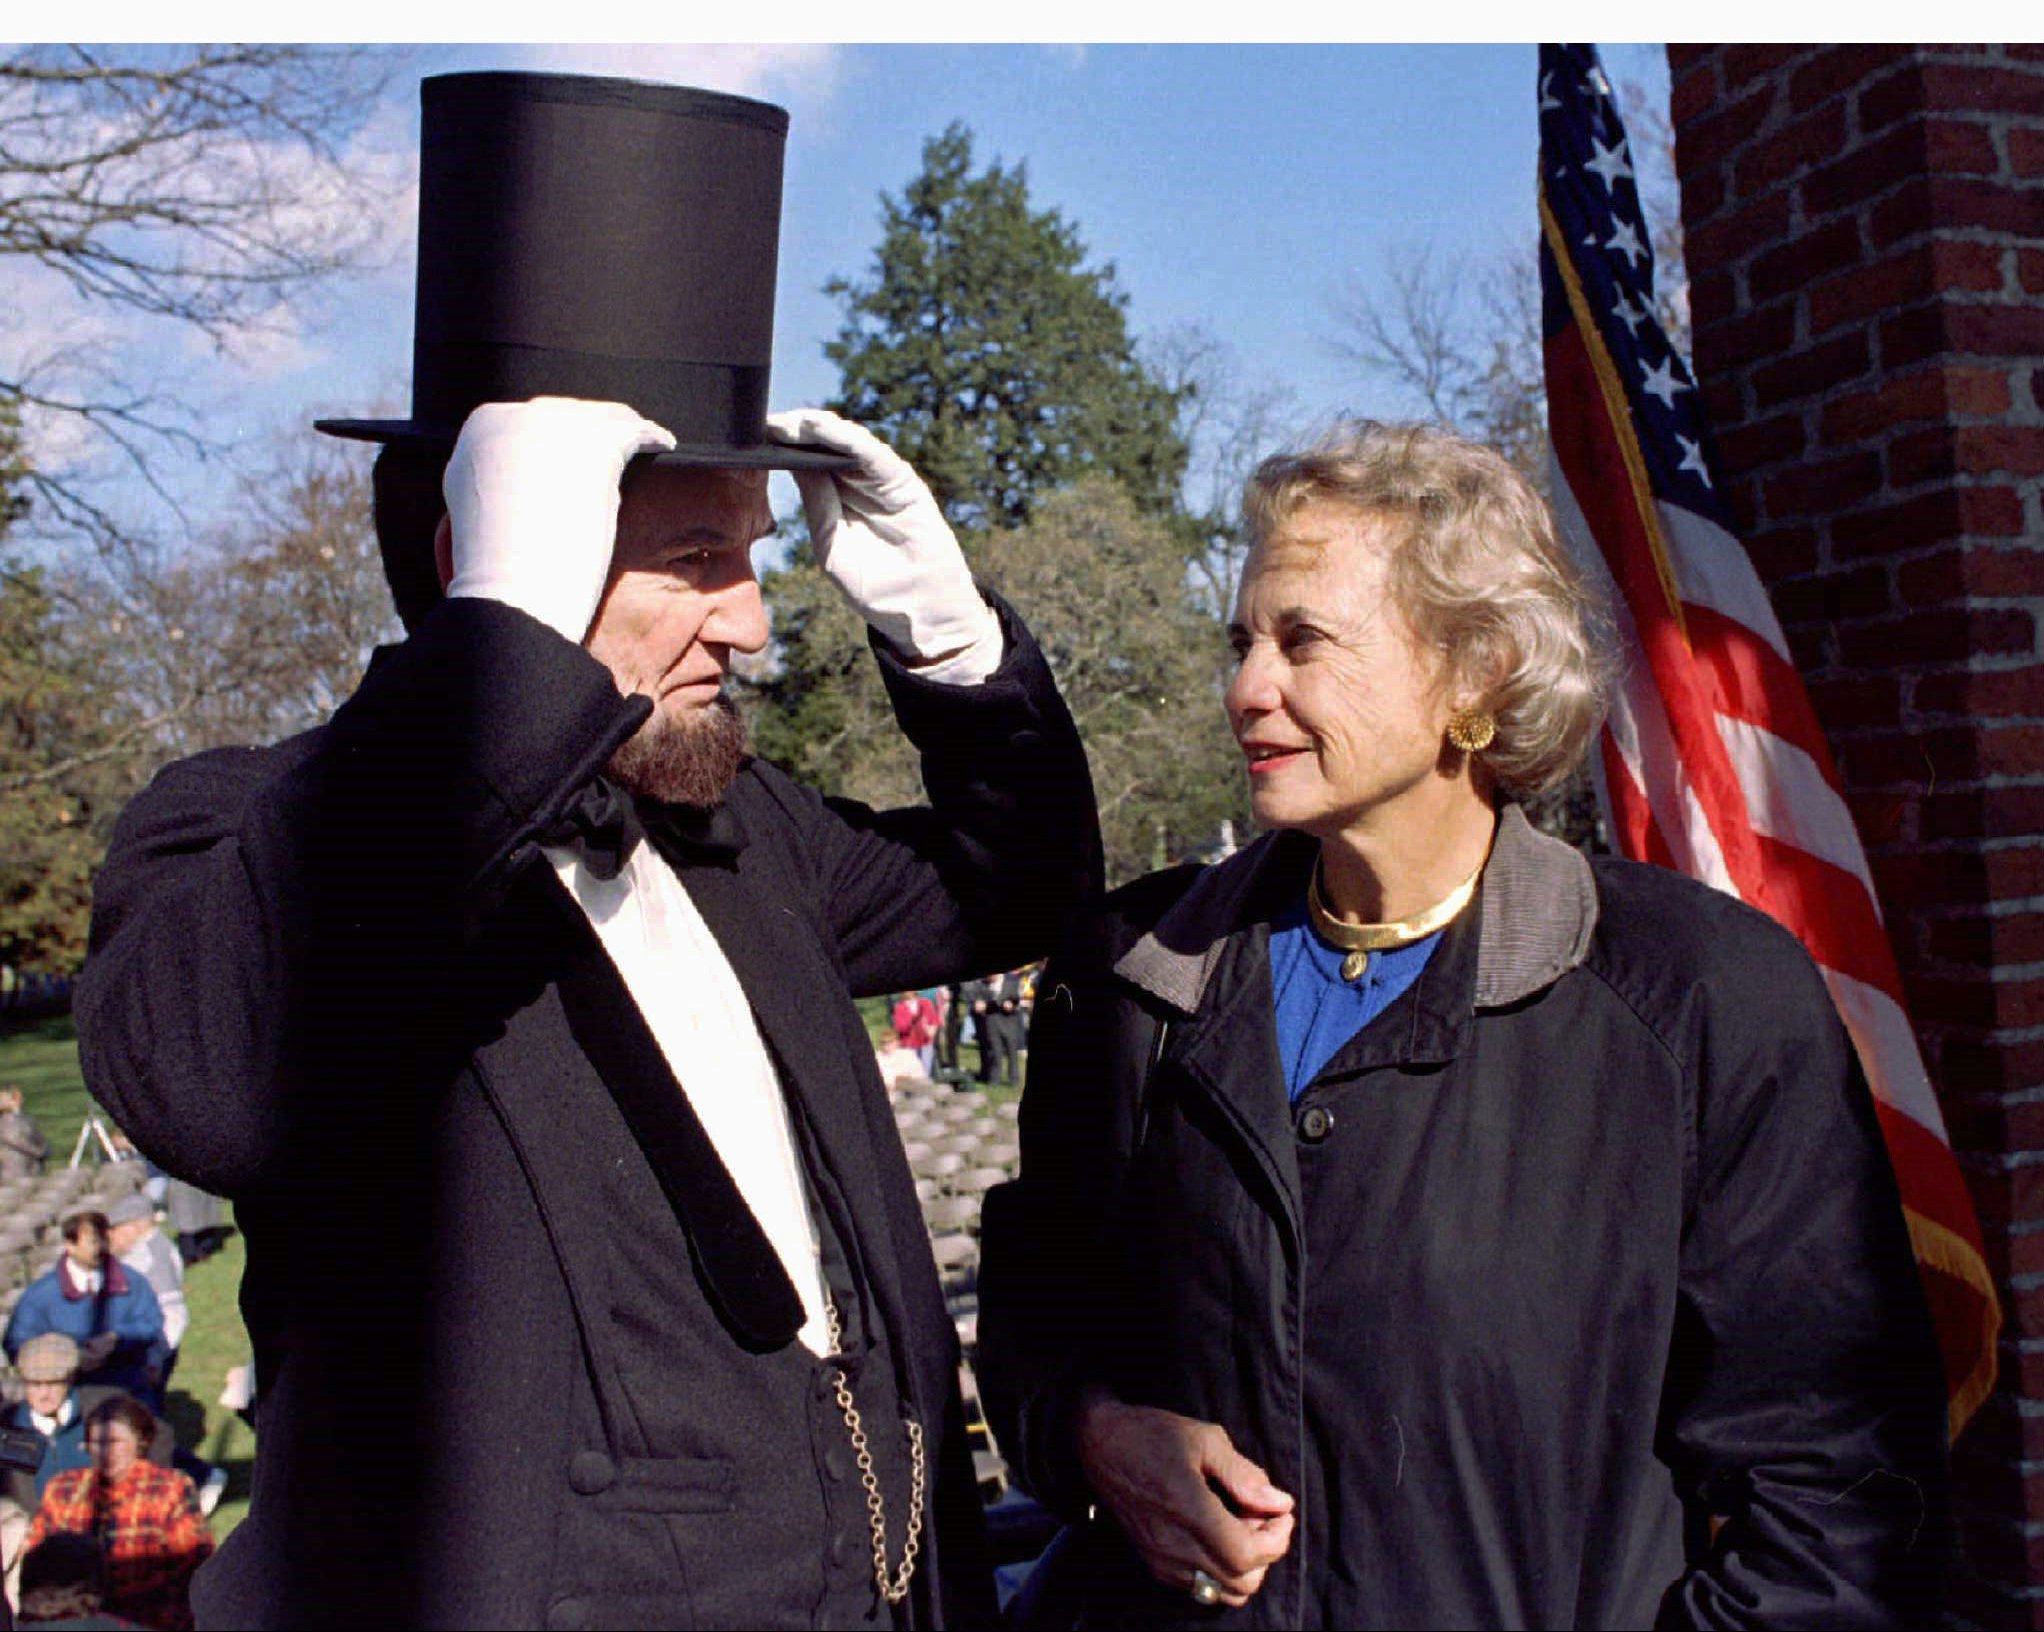 Supreme Court Justice Sandra Day O’Connor looks on as James A. Getty portrays President Abraham Lincoln at a ceremony at Gettysburg National Cemetery in 1996. Photo: Reuters